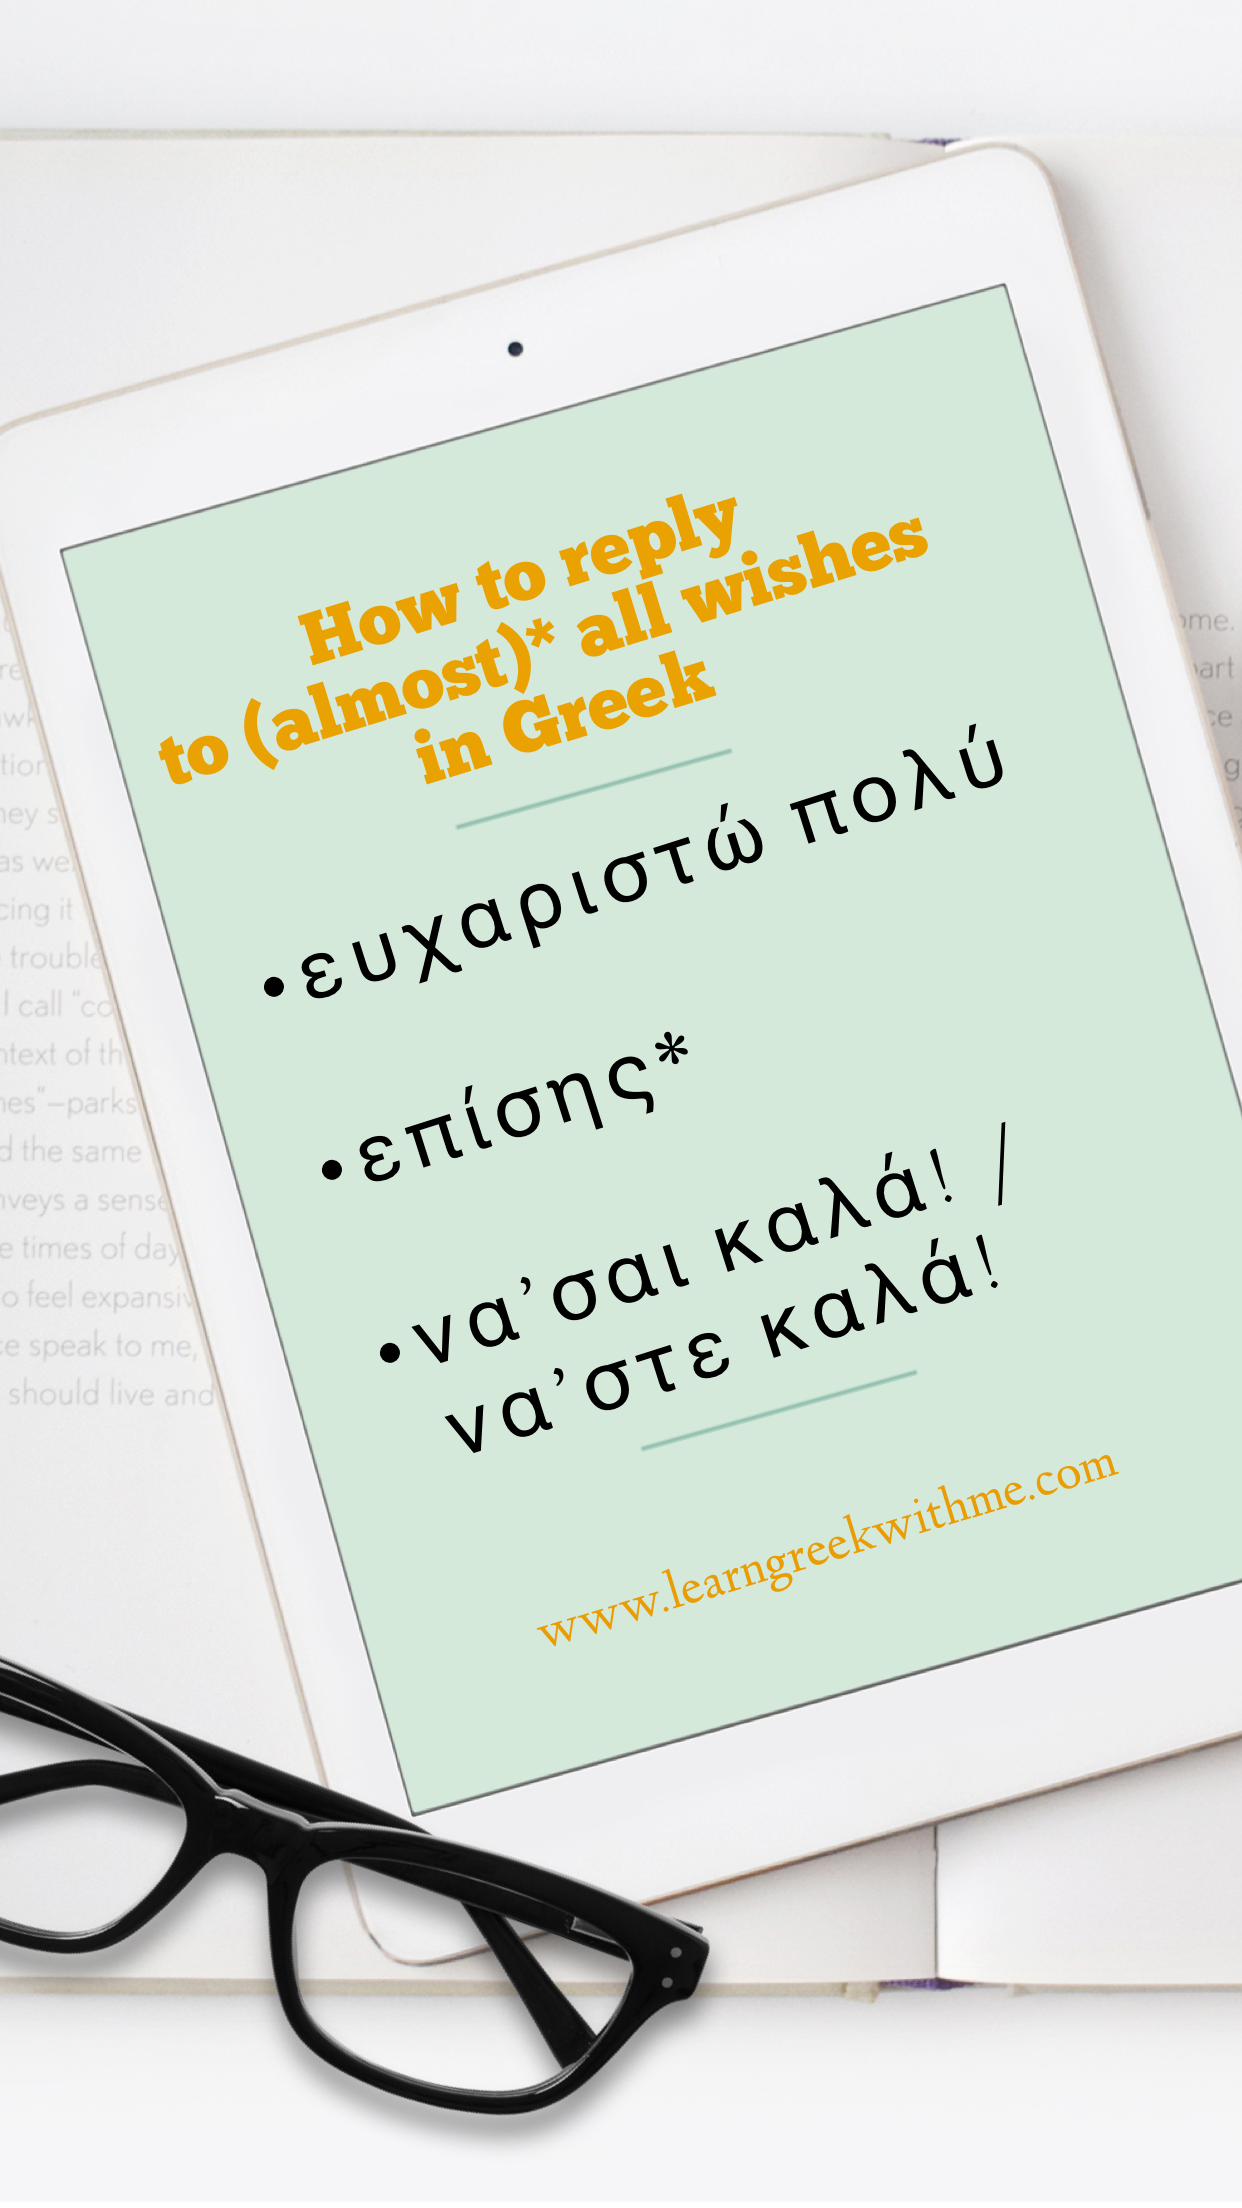 How to answer to (almost) all wishes in Greek